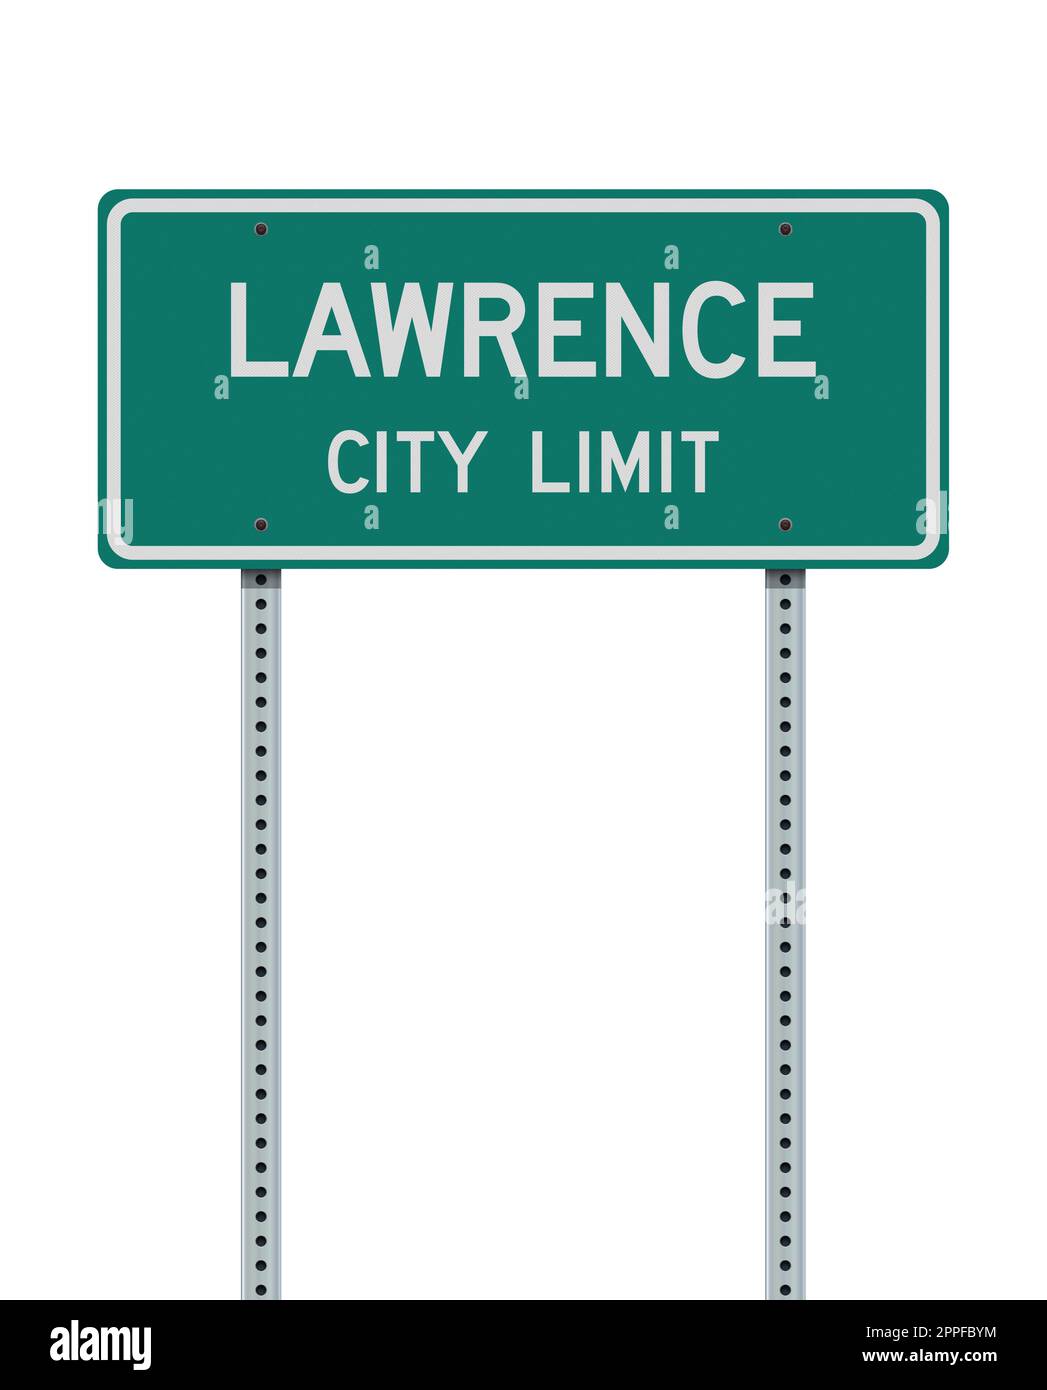 Vector illustration of the Lawrence (Kansas) City Limit green road sign on metallic posts Stock Vector